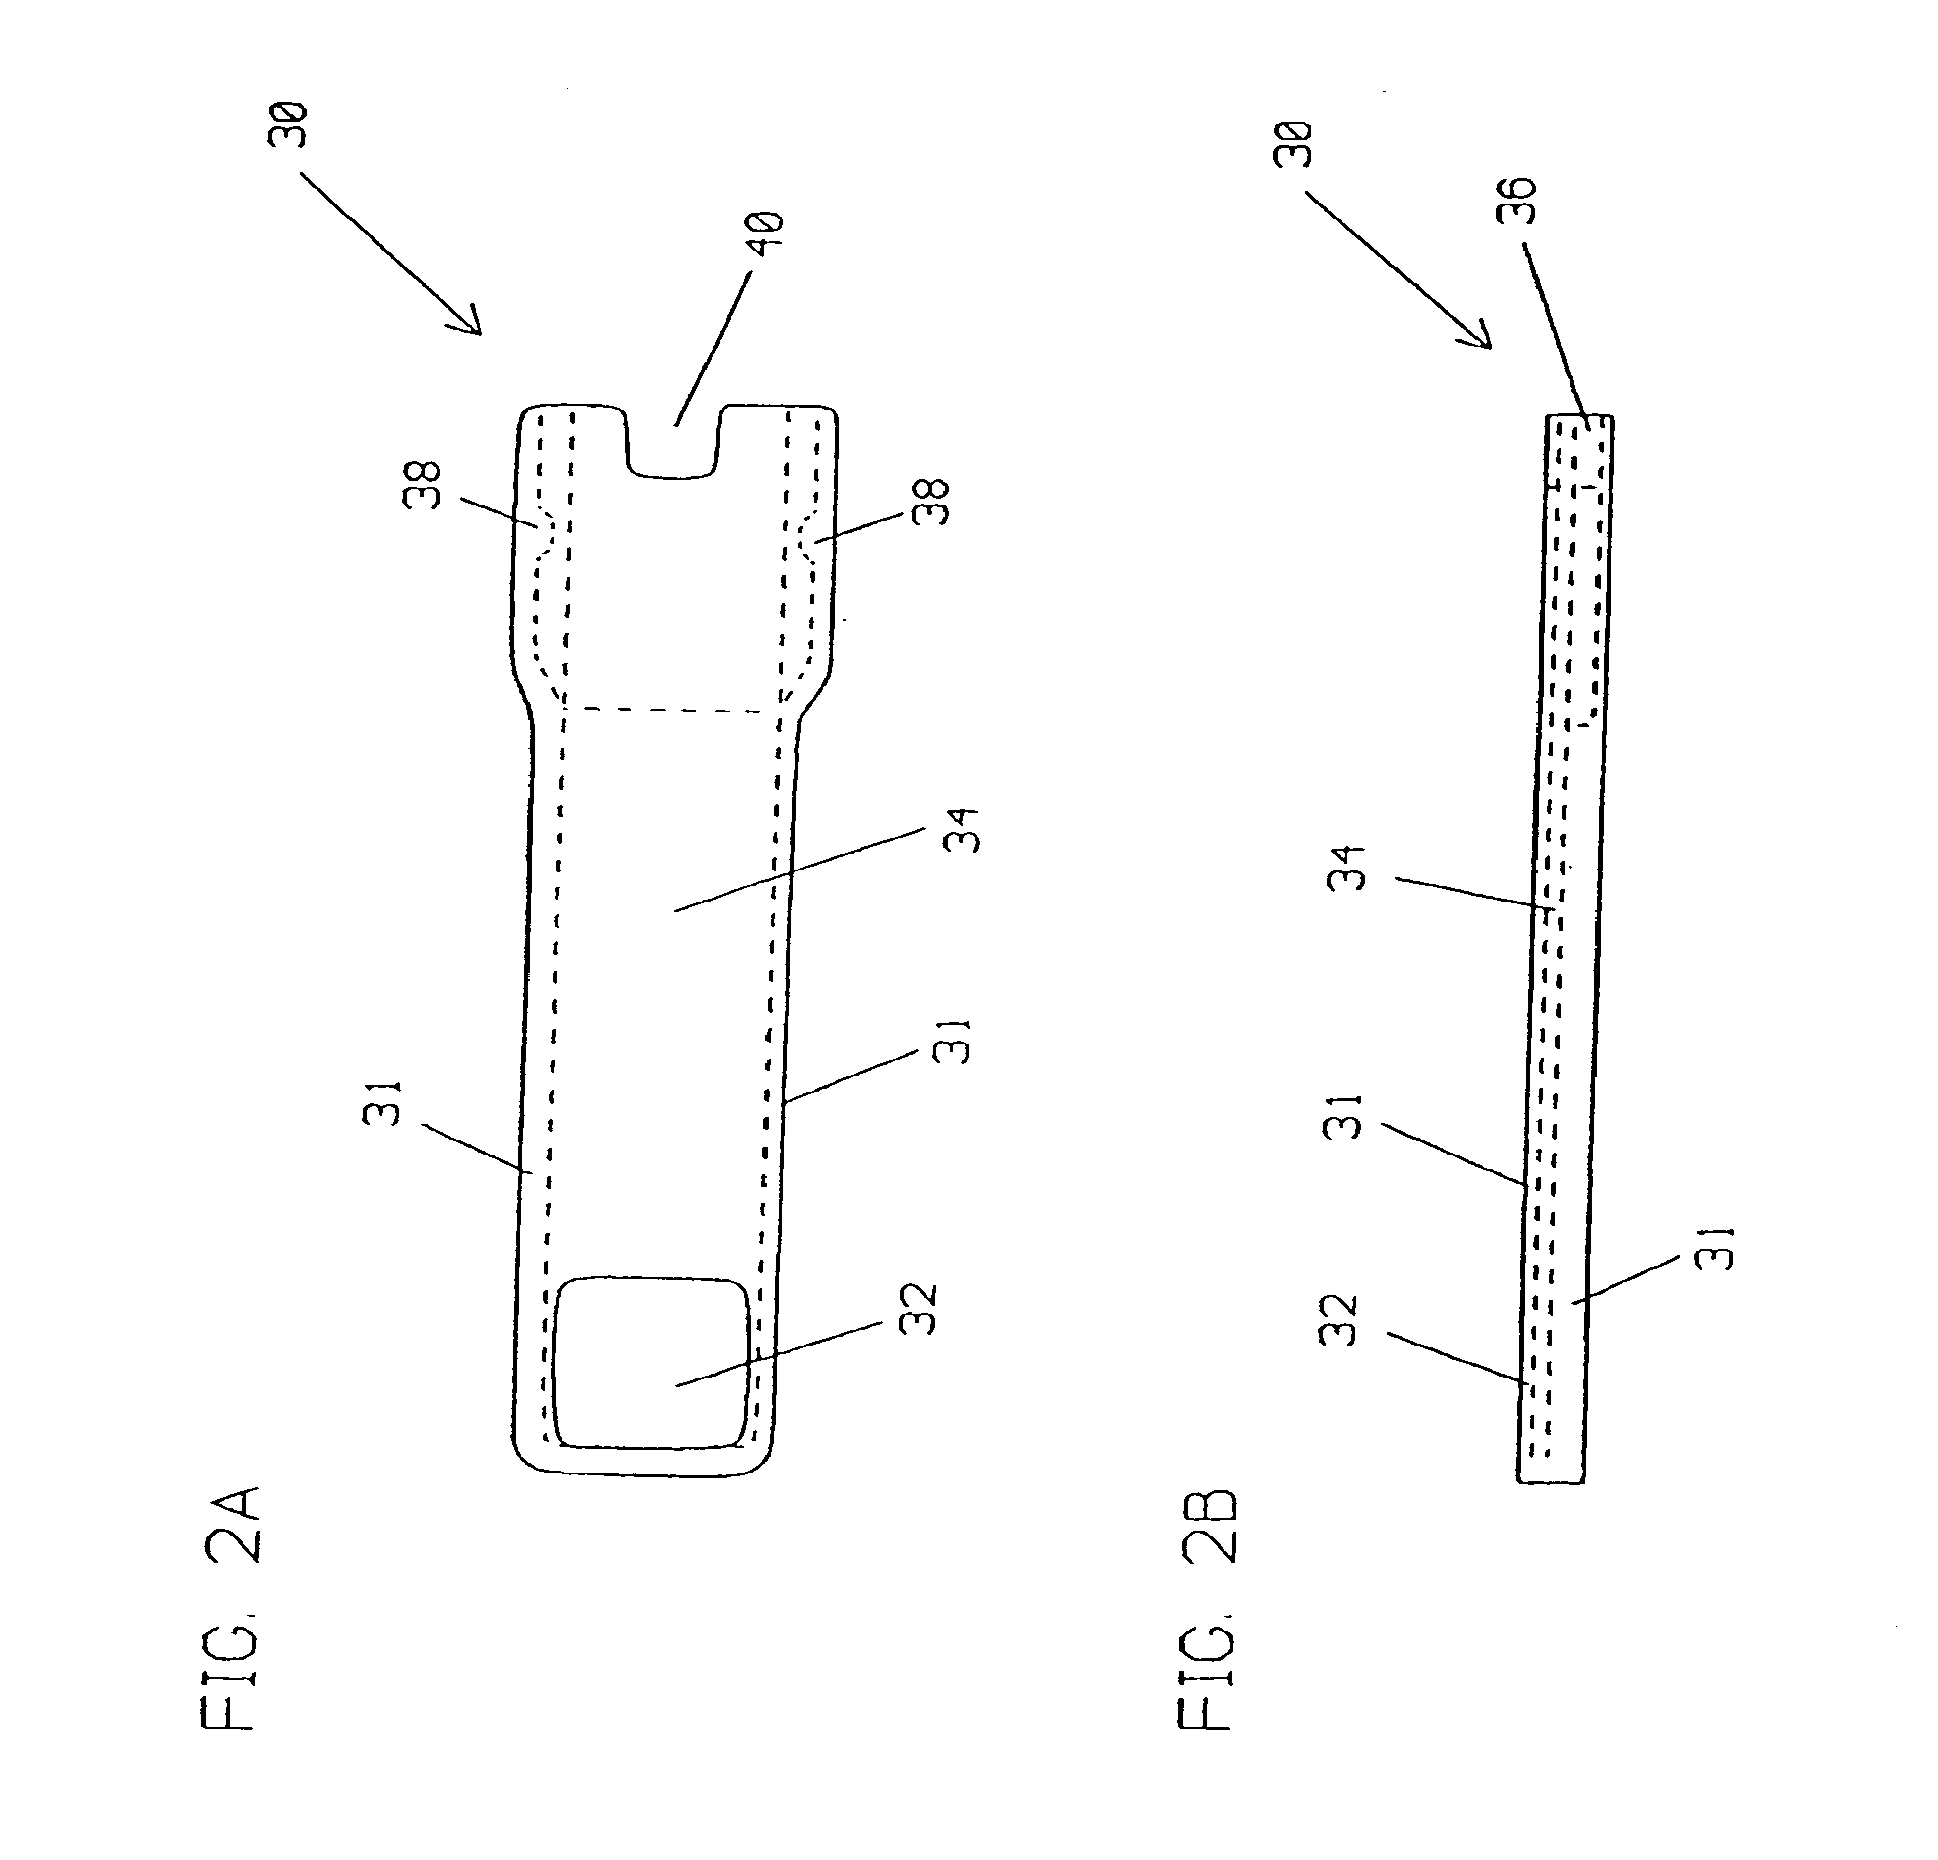 Artificial retina device with stimulating and ground return electrodes disposed on opposite sides of the neuroretina and method of attachment